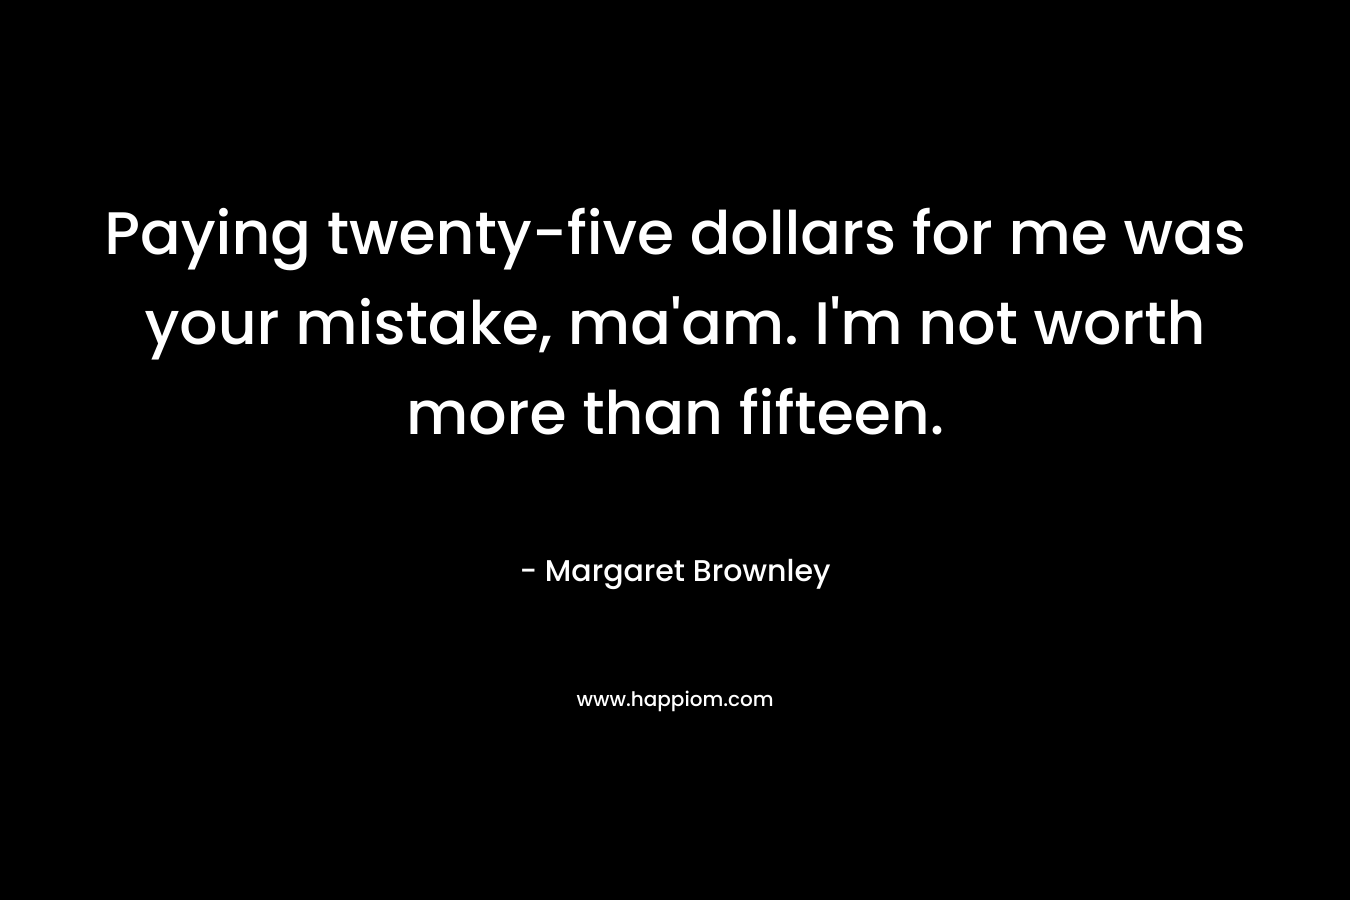 Paying twenty-five dollars for me was your mistake, ma’am. I’m not worth more than fifteen. – Margaret Brownley